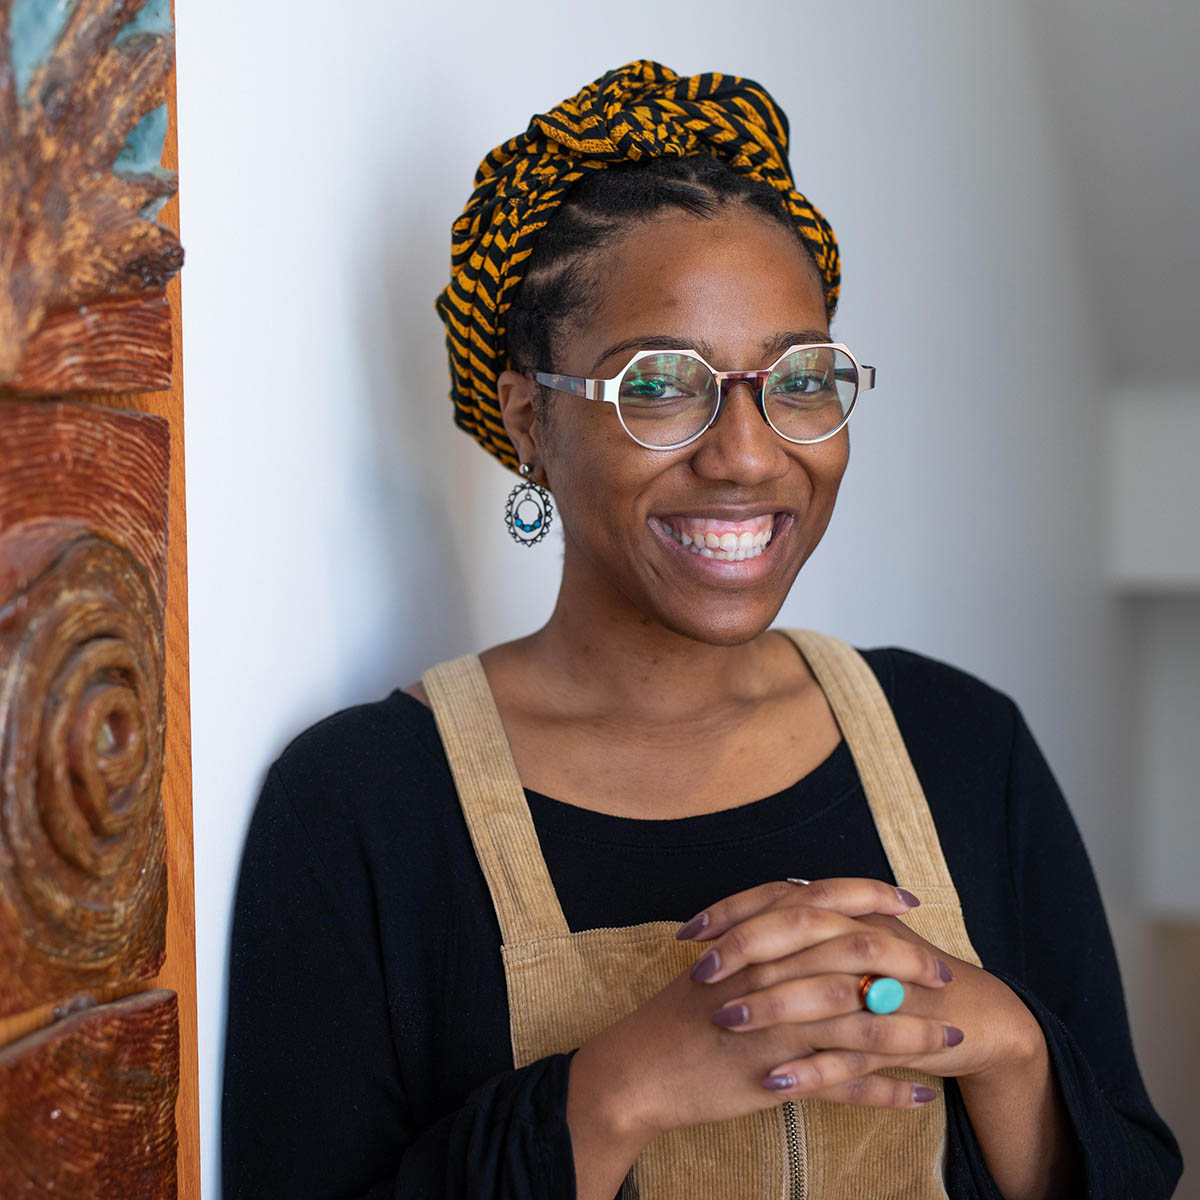 Photo of Ciera Marie Young, a Black woman with hexagonal glasses, smiling in front of a colorful painting